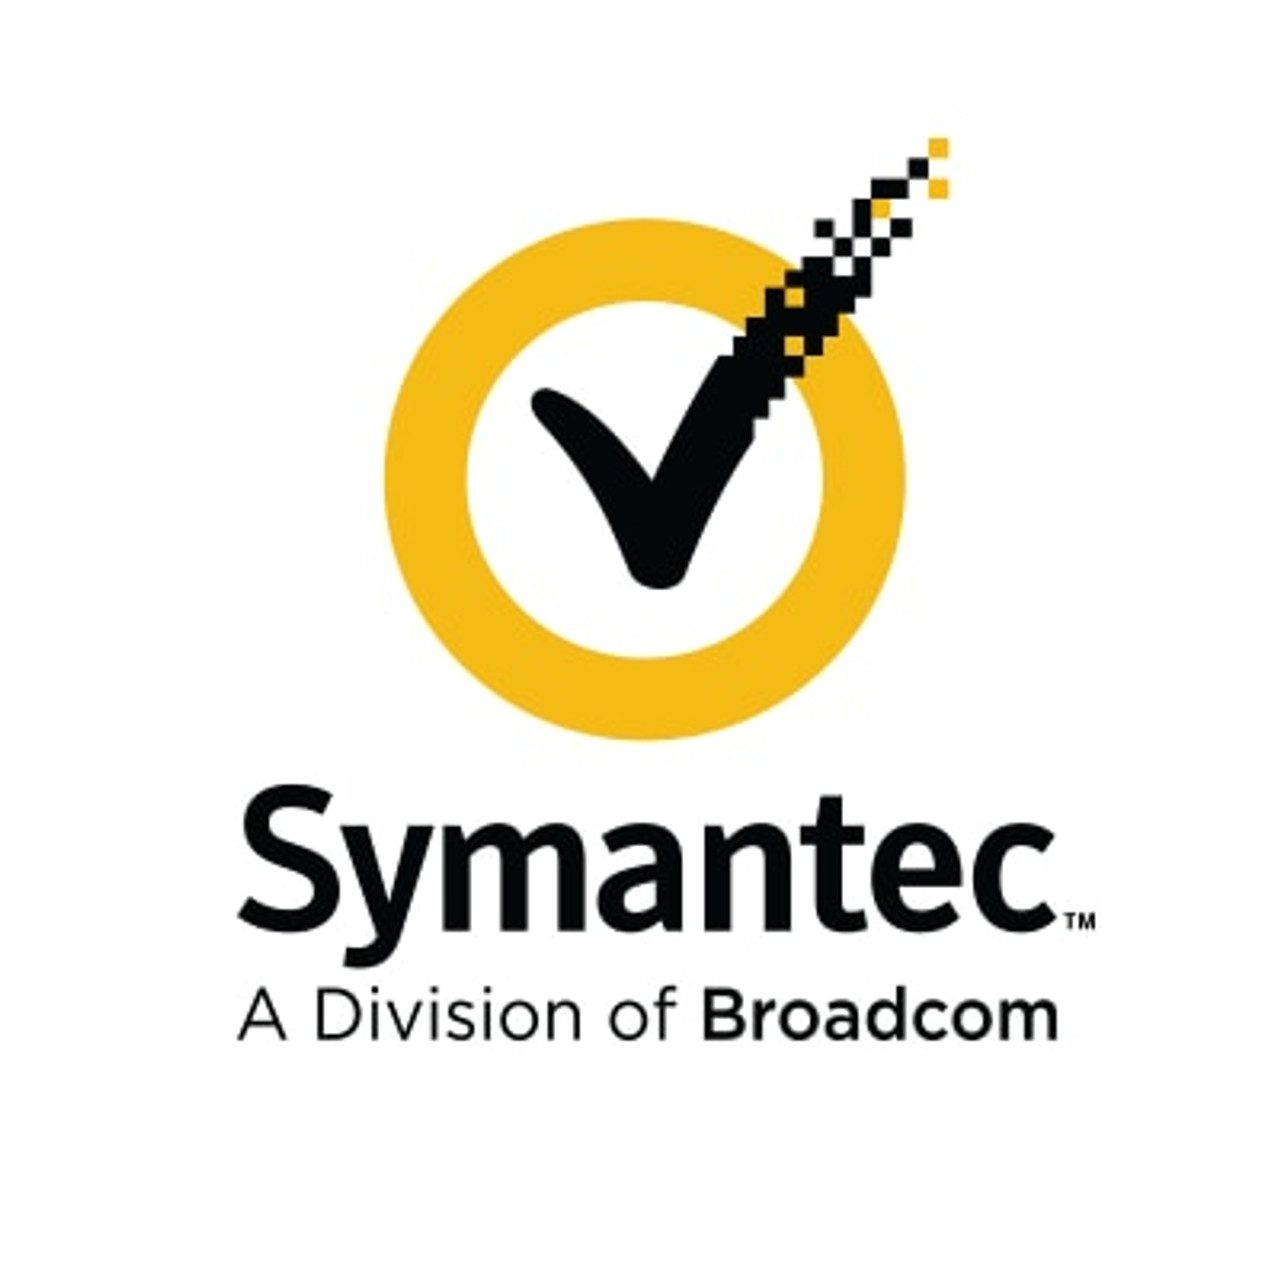 Symantec Complete Endpoint Defense (with SEP), Additional Quantity Hybrid Subscription License with Support, 1,000-2,499 Devices 1 YR